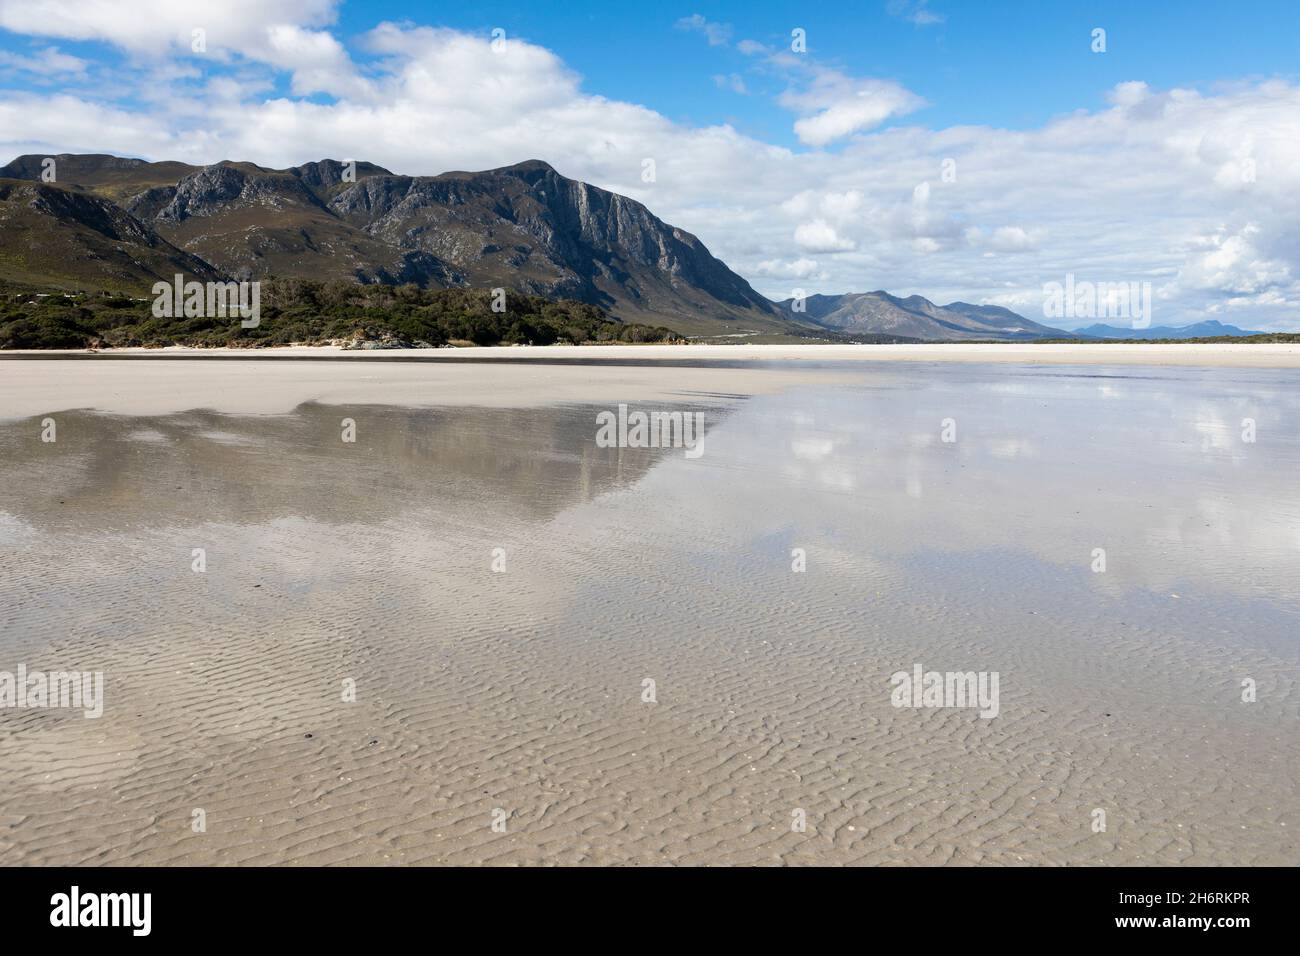 A wide open sandy beach and view along the coastline of the Atlantic ocean. Stock Photo